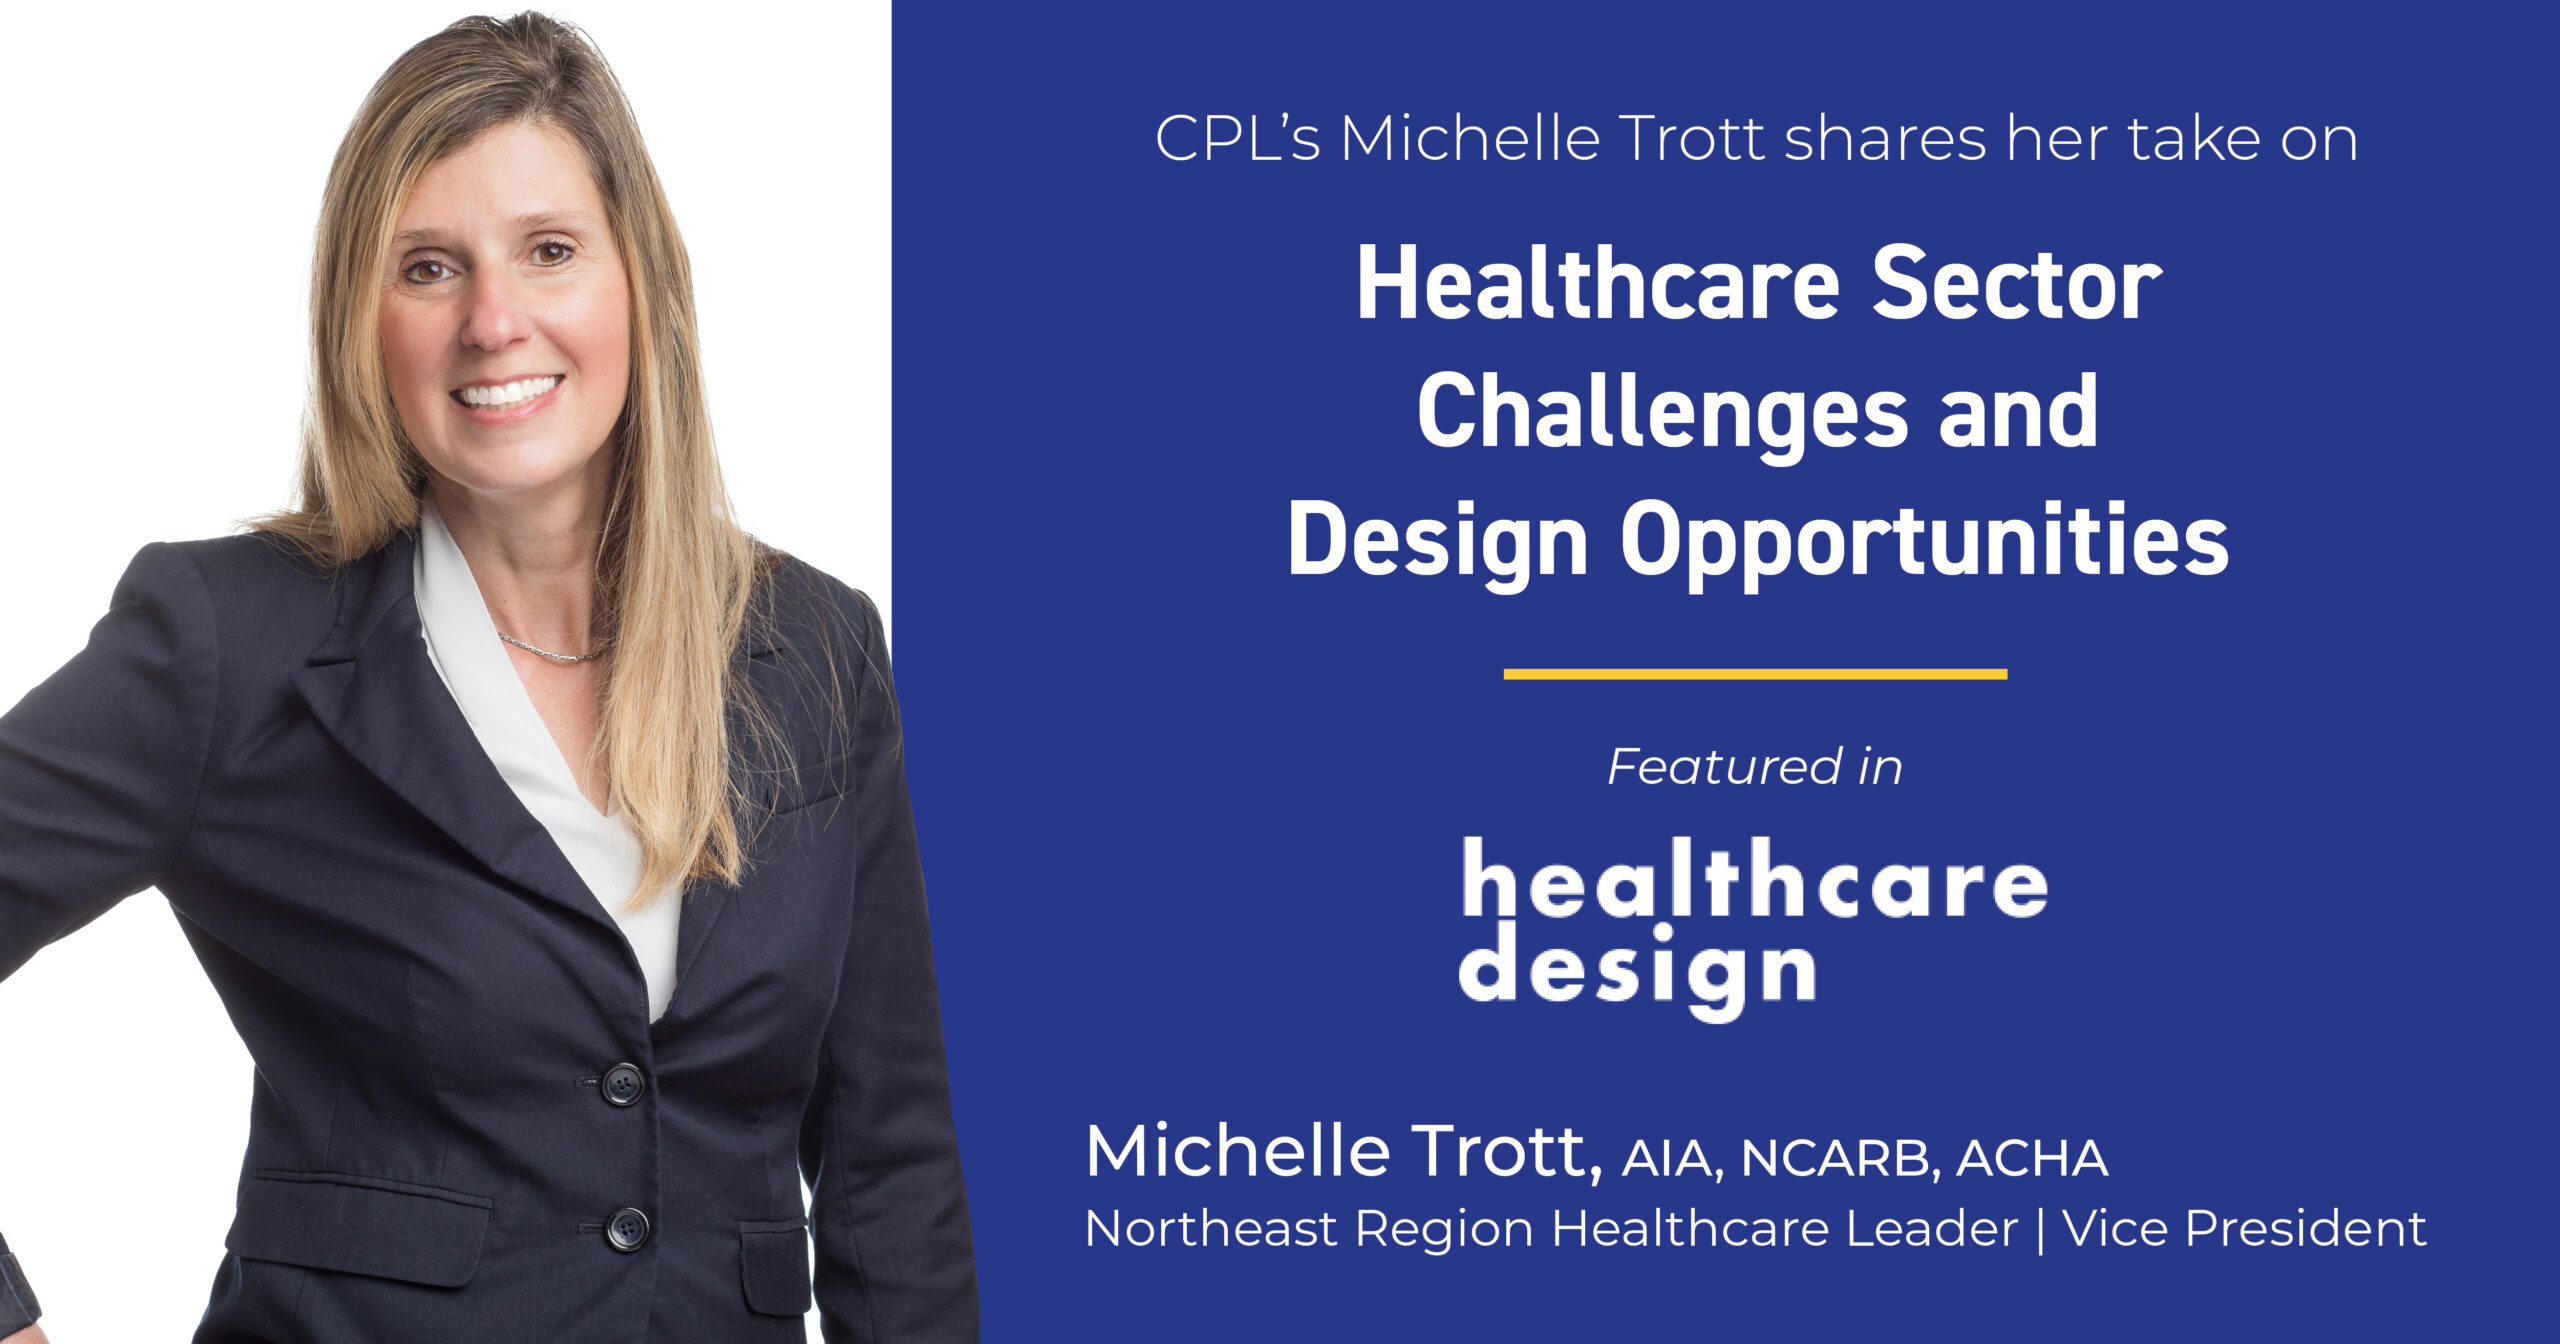 Graphic shows a woman wearing a blazer and smiling on the left. On the right it reads "CPL's Michelle Trott shares her take on Healthcare Sector Challengers and Design Opportunities. Featured in healthcare design. Michelle Trott, AIA, NCARB, ACHA. Northeast Region Healthcare Leader | Vice President"